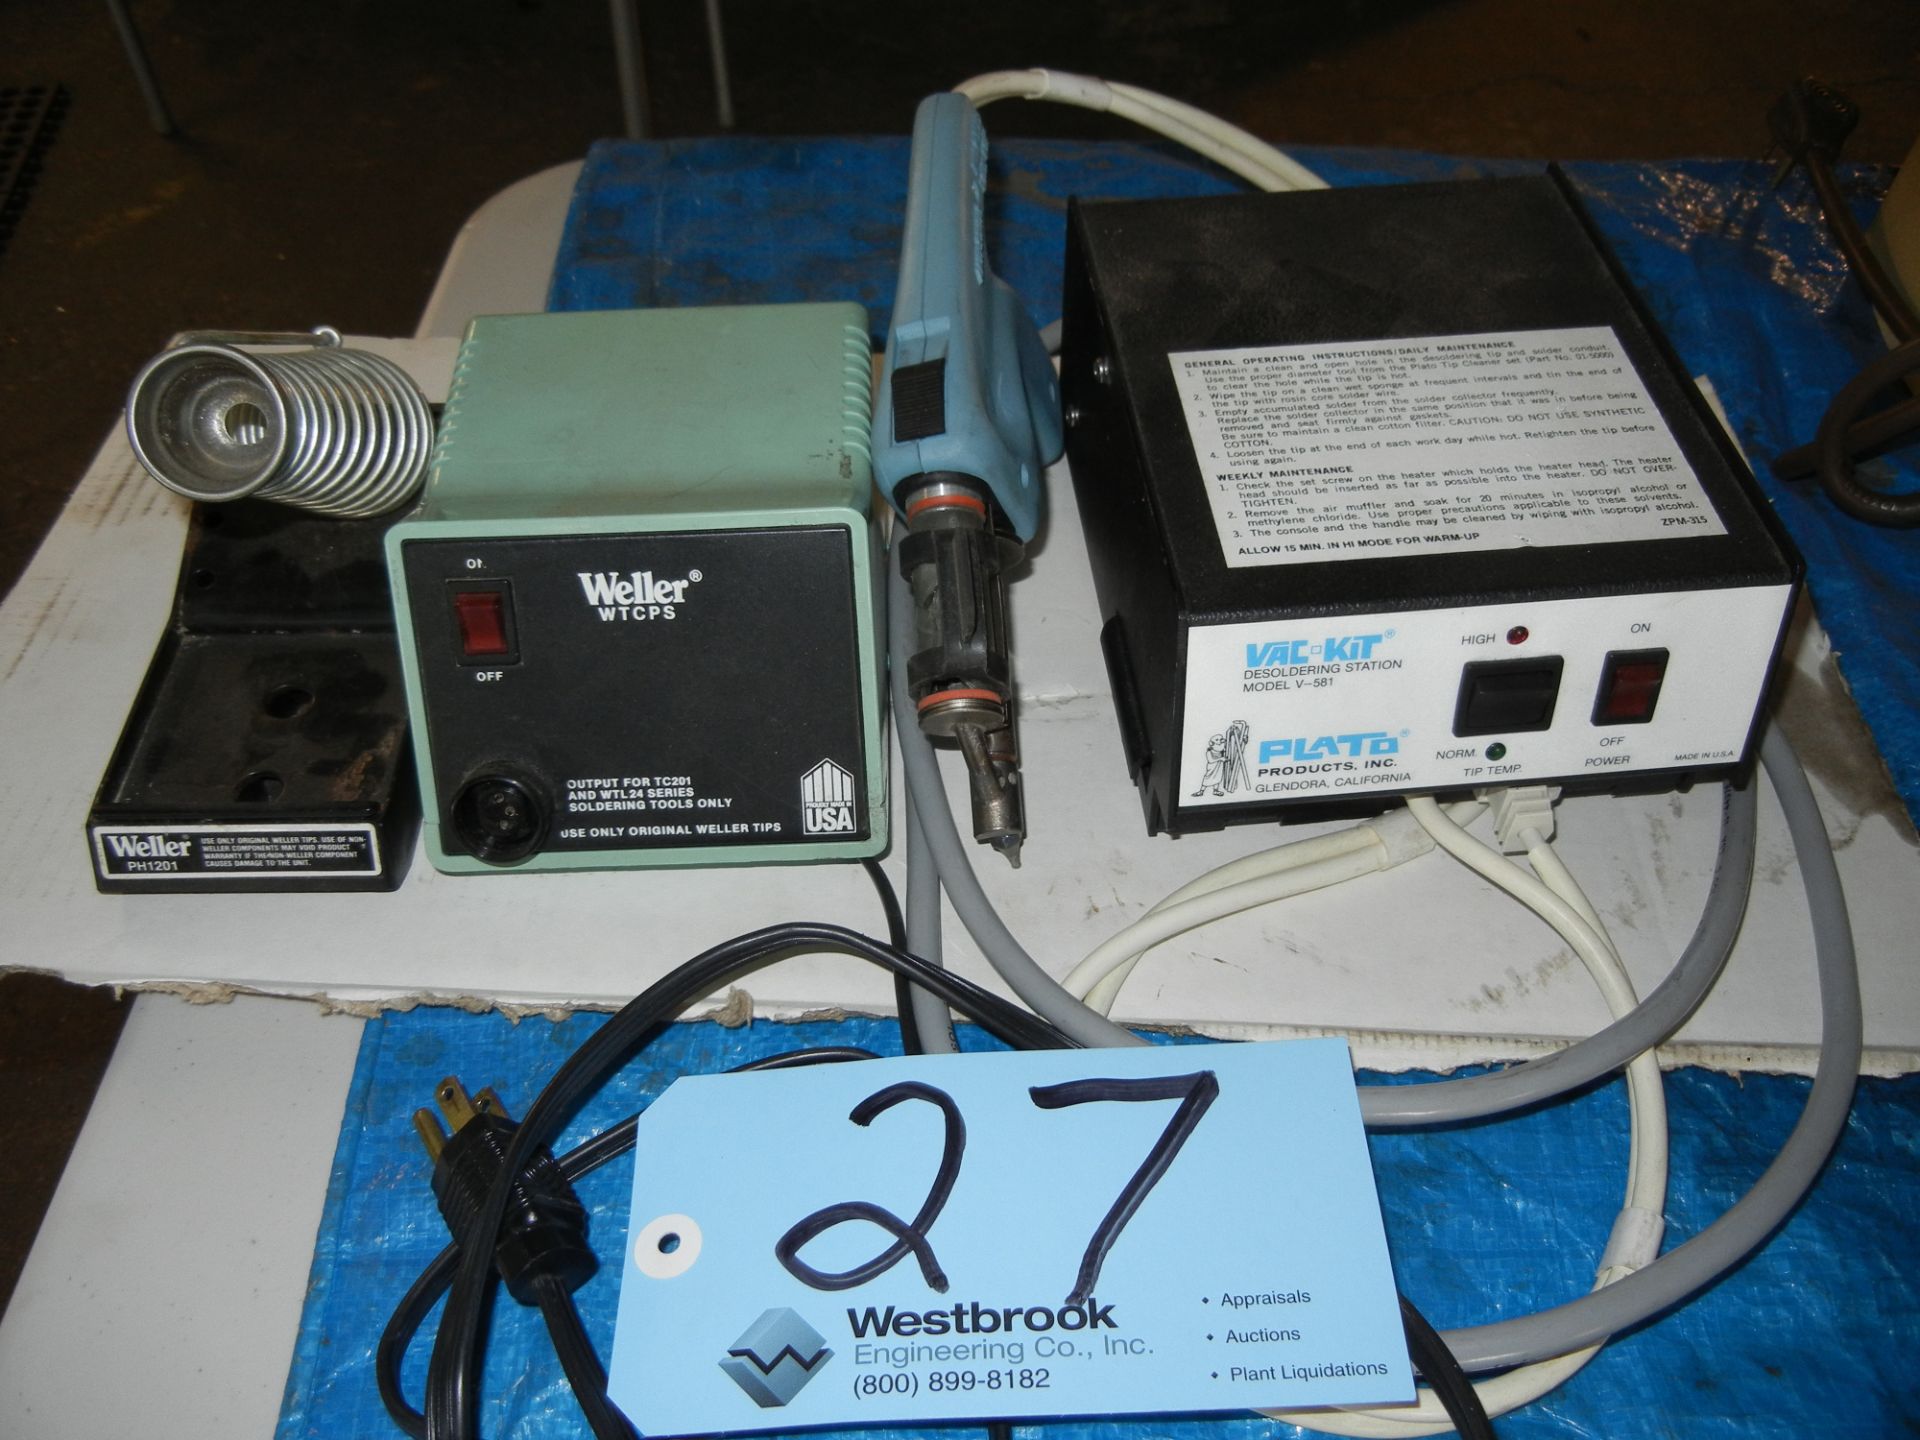 Weller Model WTCPS; Soldering Station with Plato Model V-581; Vac-Kit Desoldering Station